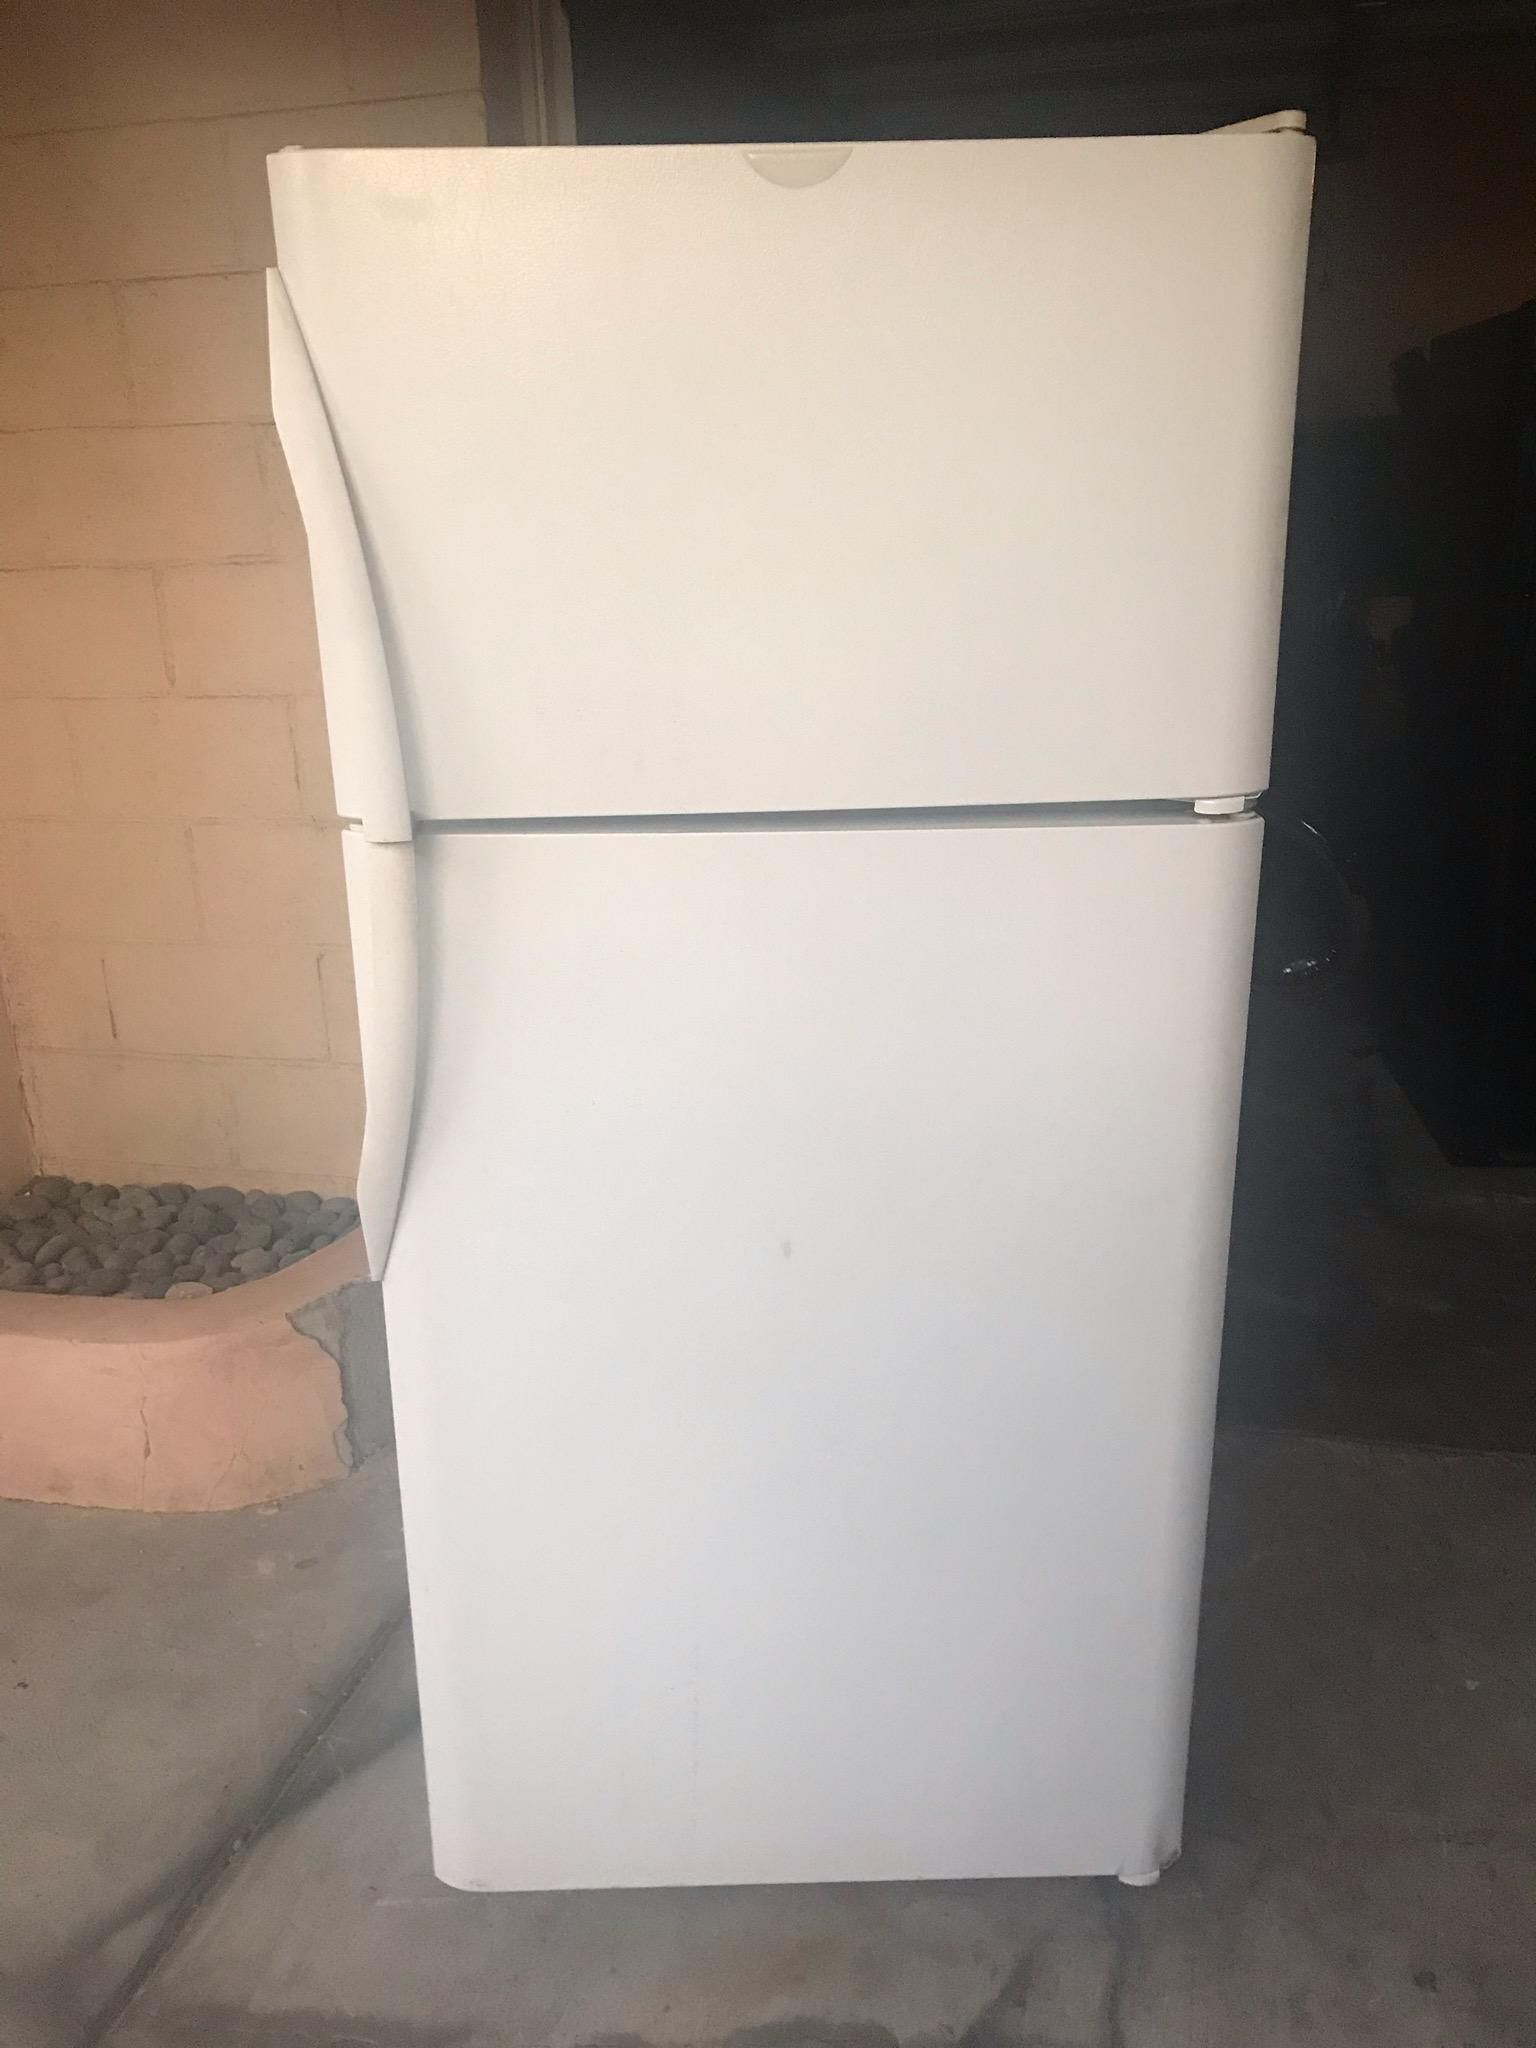 $225 Frigidaire white 18 cubic fridge includes delivery in the San Fernando Valley a warranty and installation